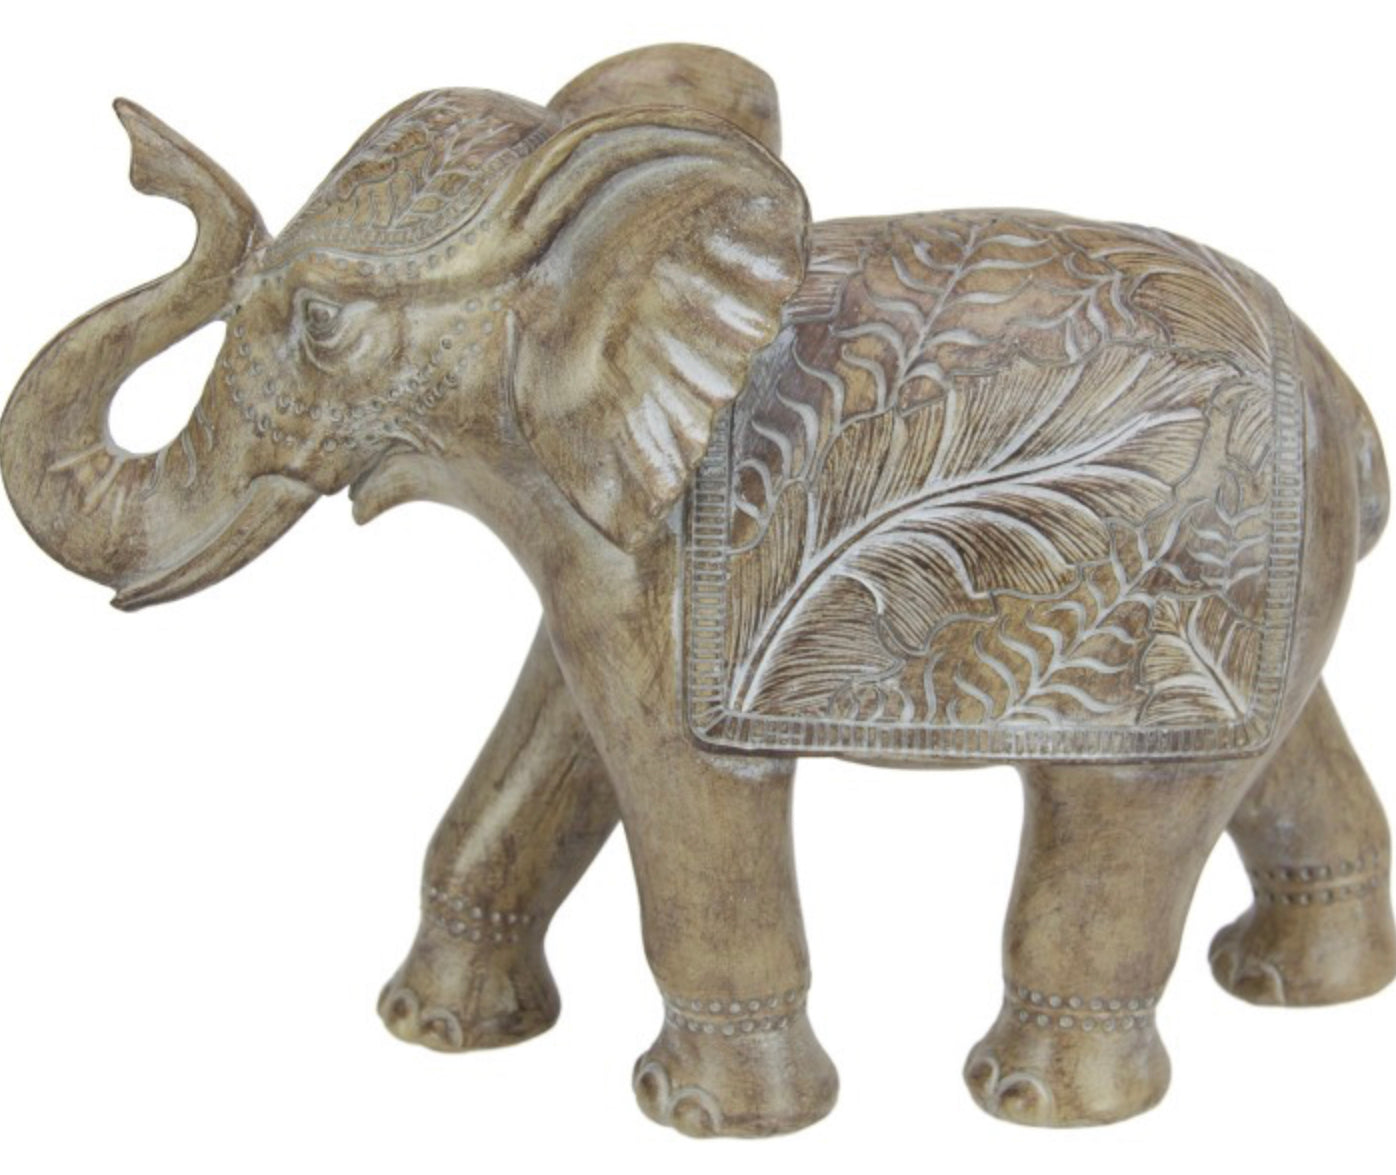 25CM LONG BROWN DECO ELEPHANT WITH LEAF DETAIL